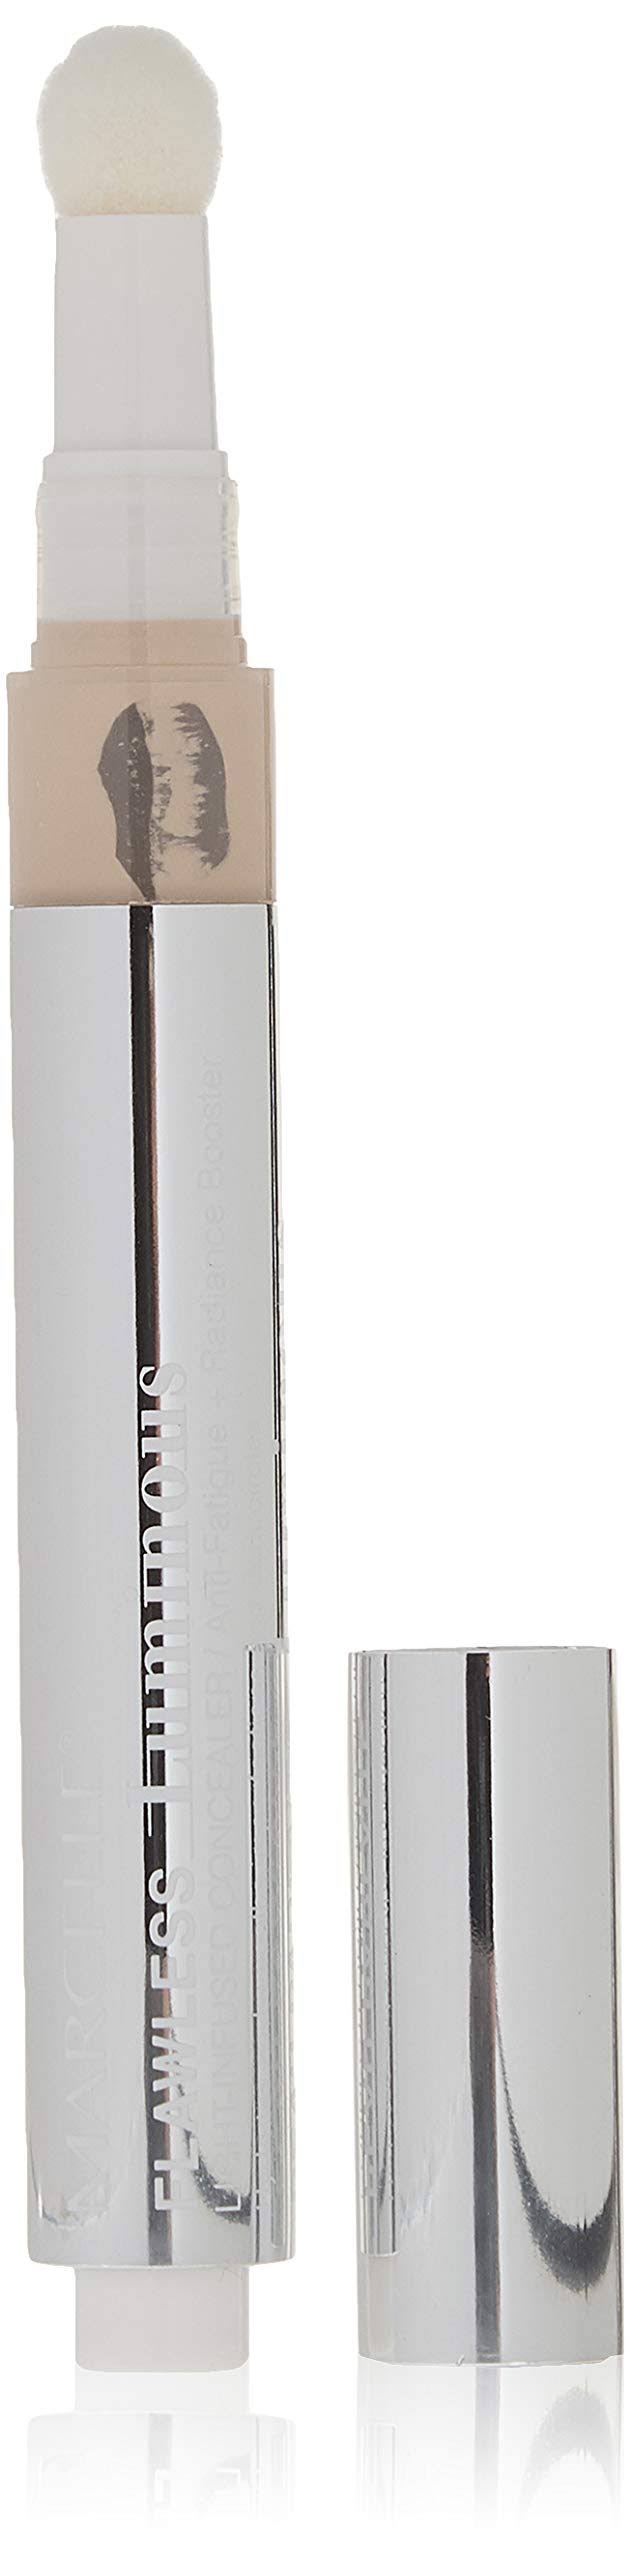 Marcelle Flawless Luminous Light-Infused Concealer, Fair, Hypoallergenic and Fragrance-Free, 0.1 fl oz 164602